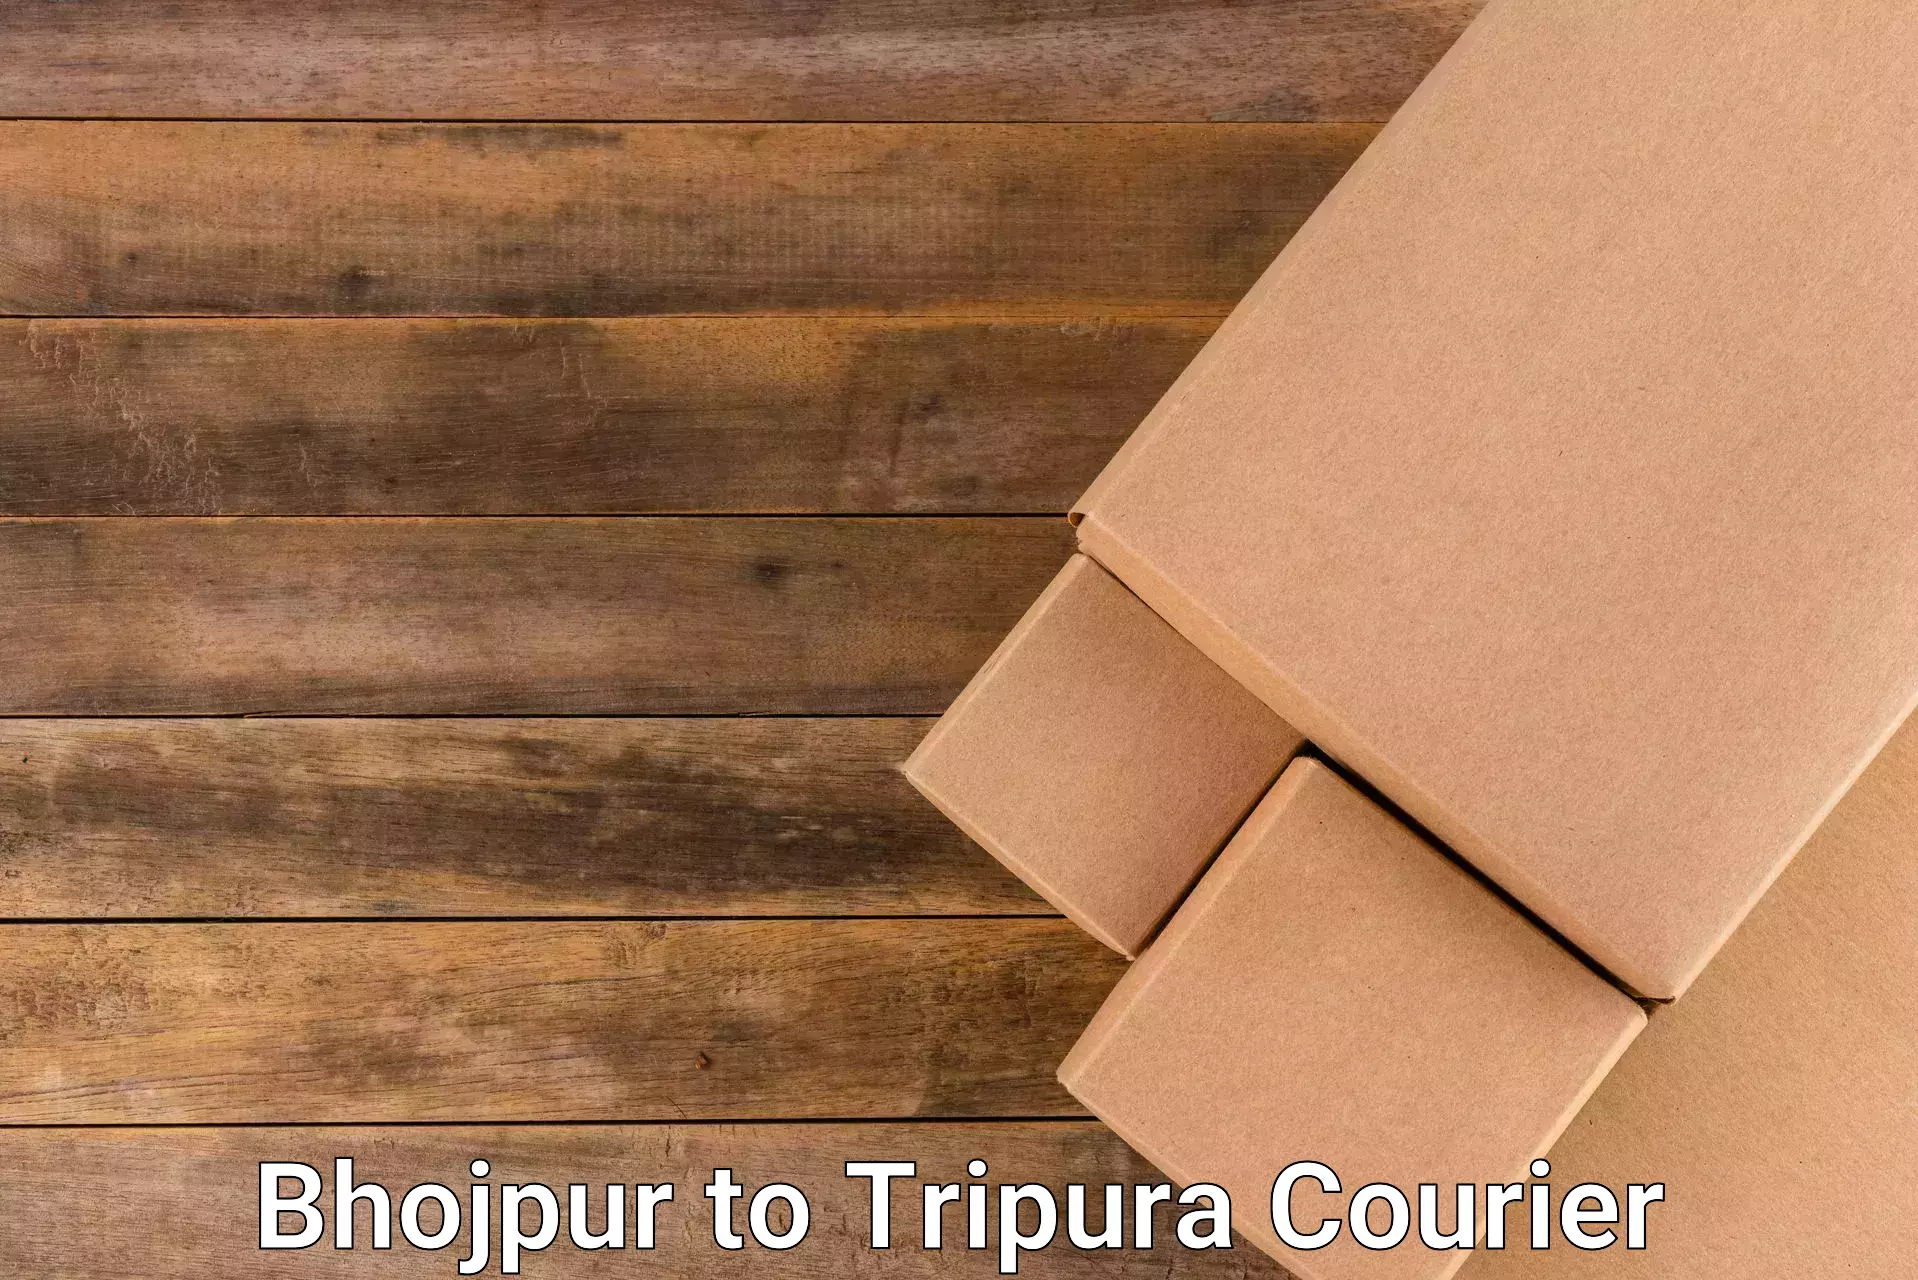 High-capacity parcel service Bhojpur to South Tripura